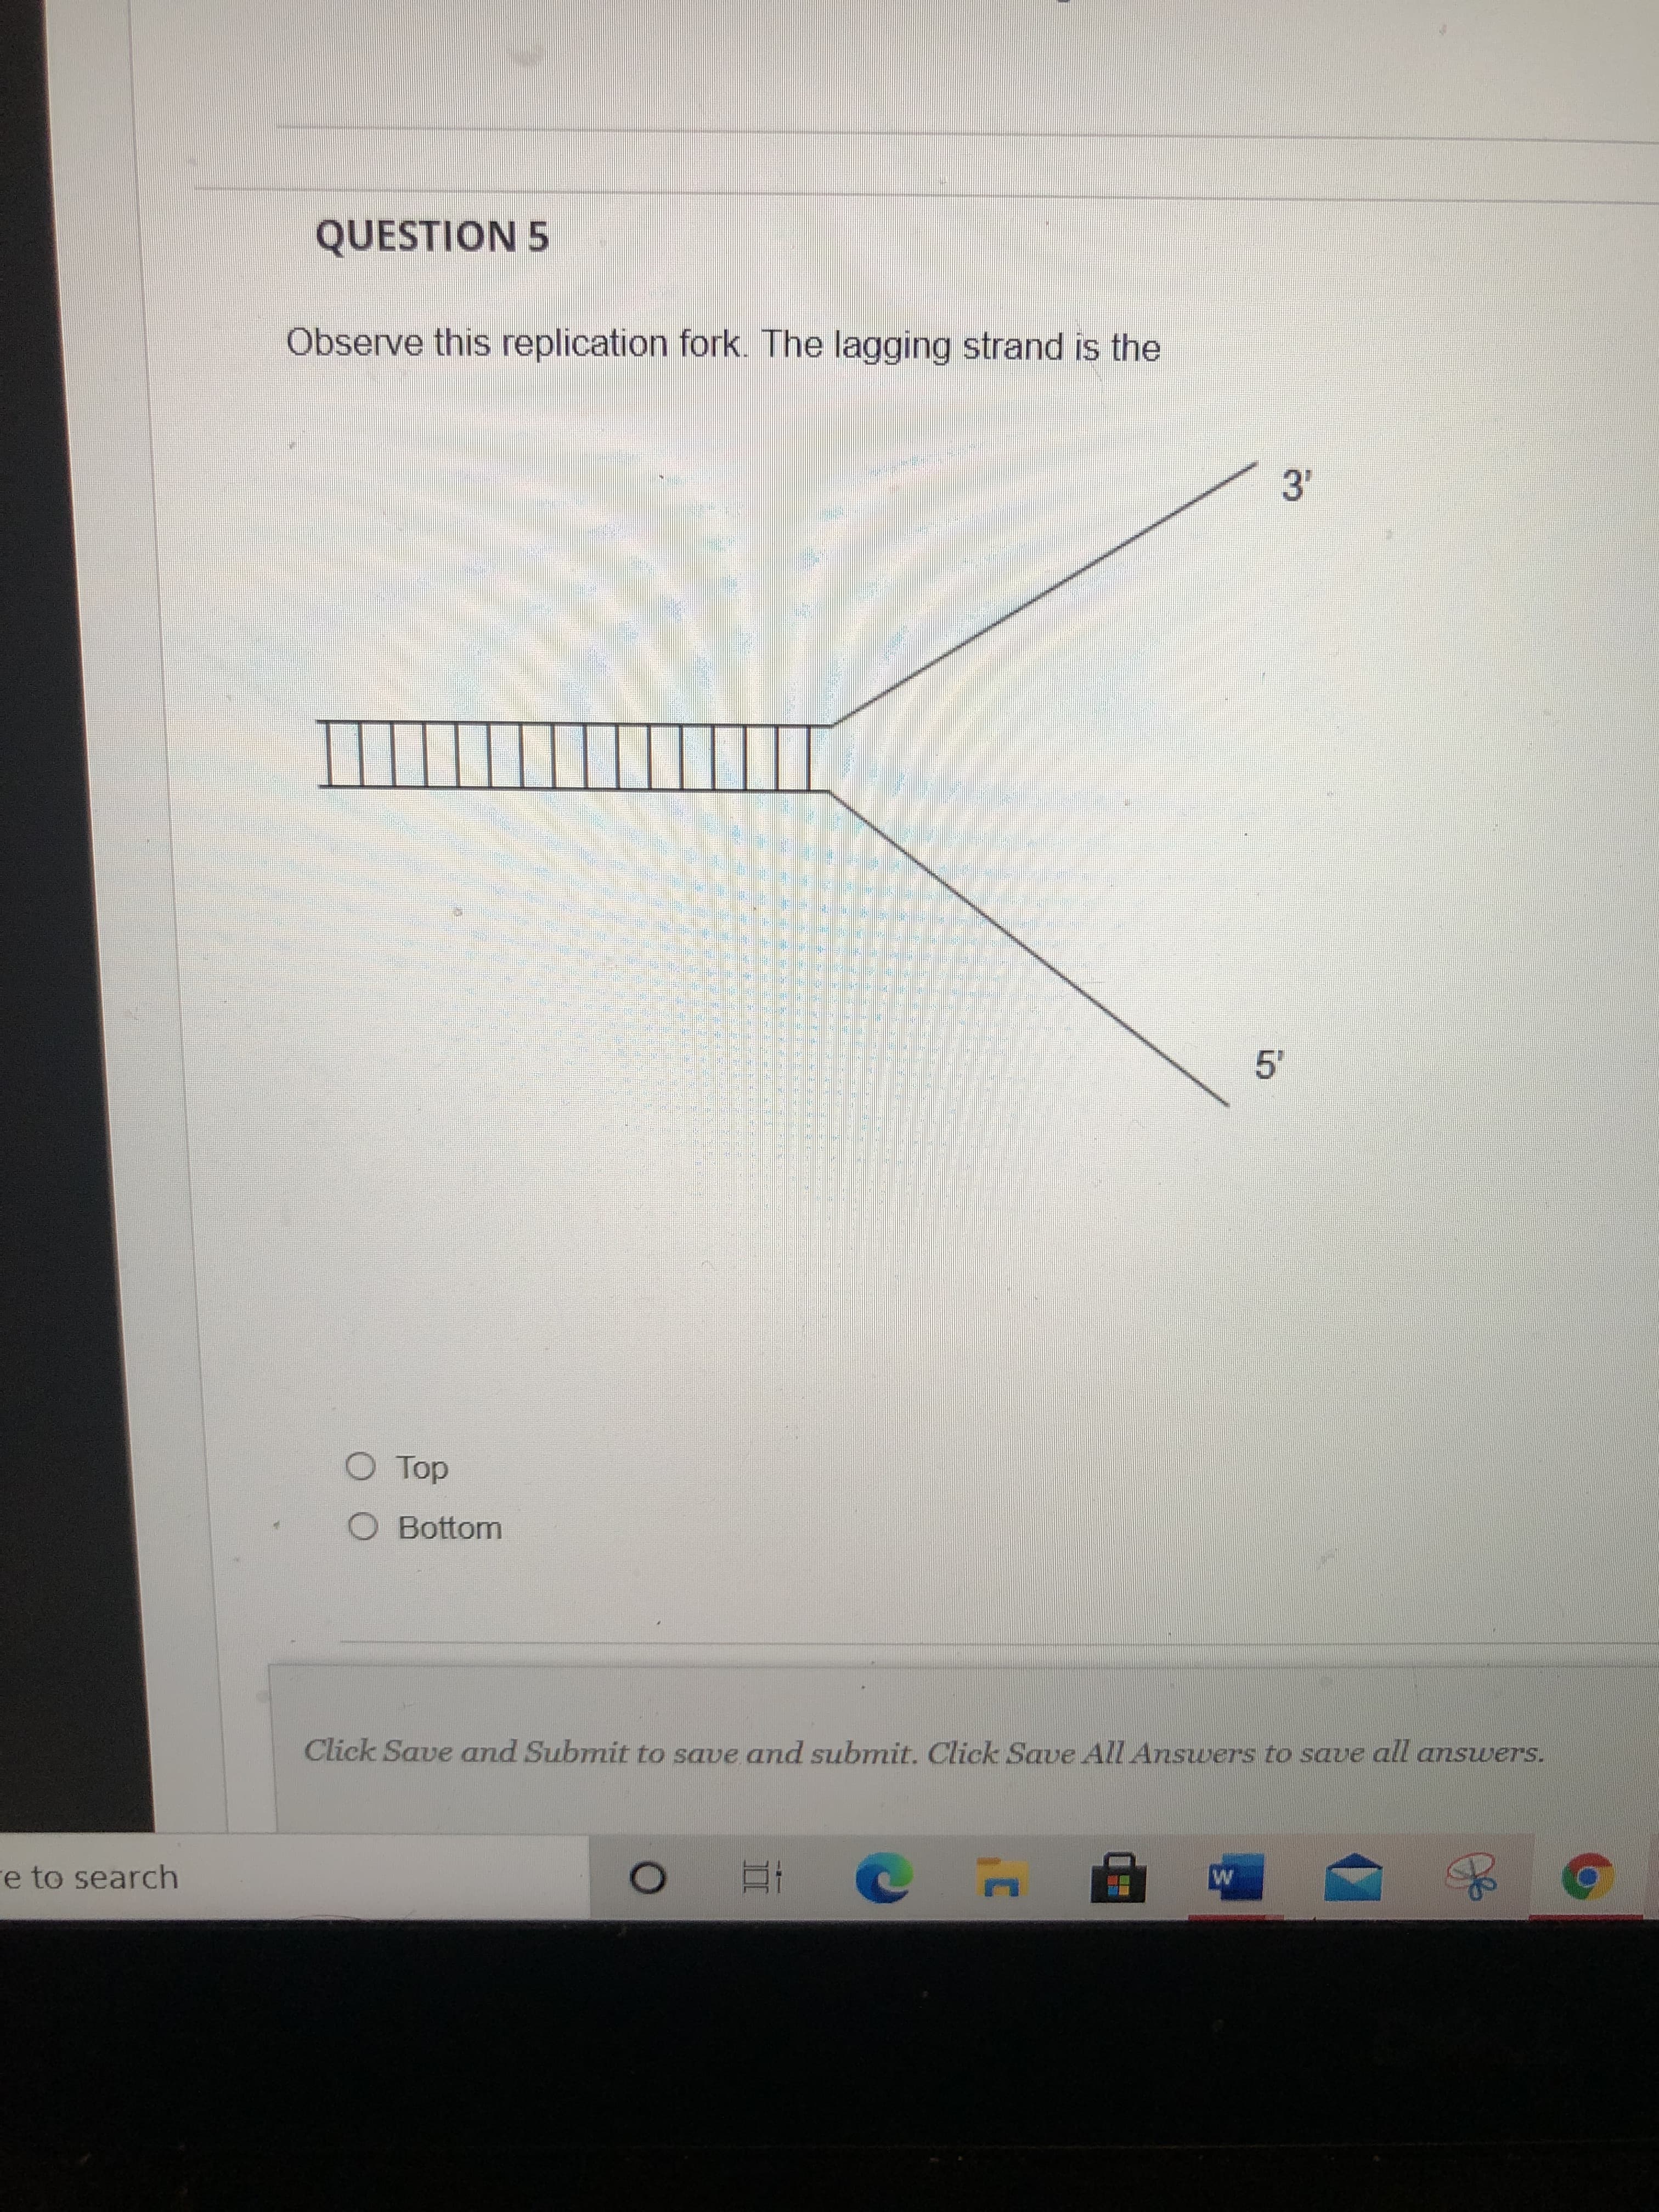 QUESTION 5
Observe this replication fork. The lagging strand is the
O Top
O Bottom
Click Save and Subrnit to save and submit. Click Save All Answers to save all answers.
e to search
